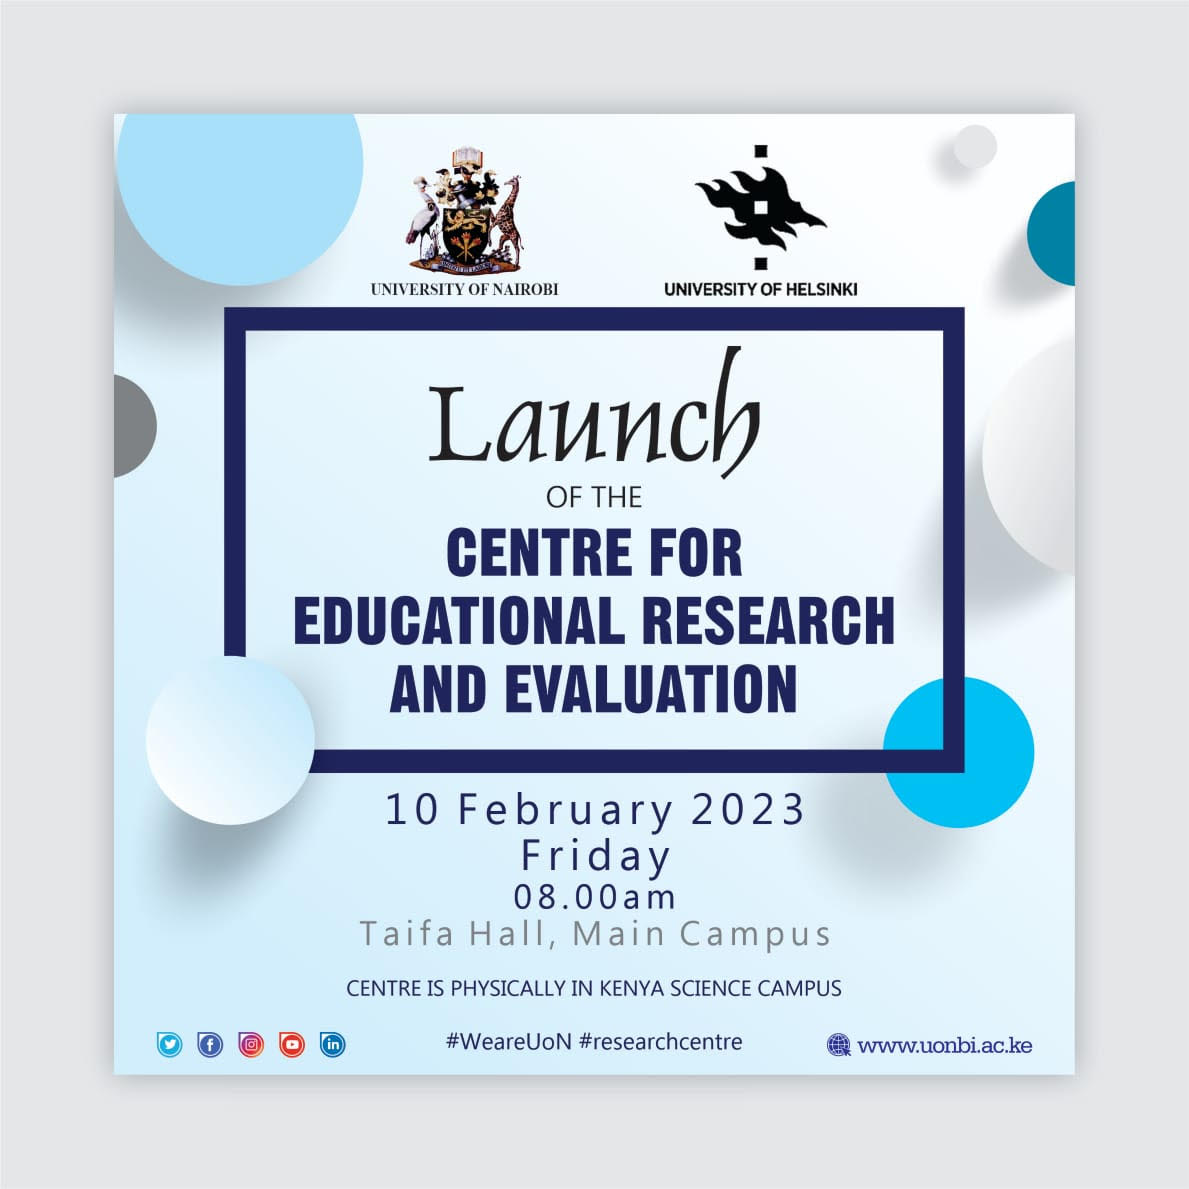 Attend the launch of the Centre for Educational Research and Evaluation (CERE)